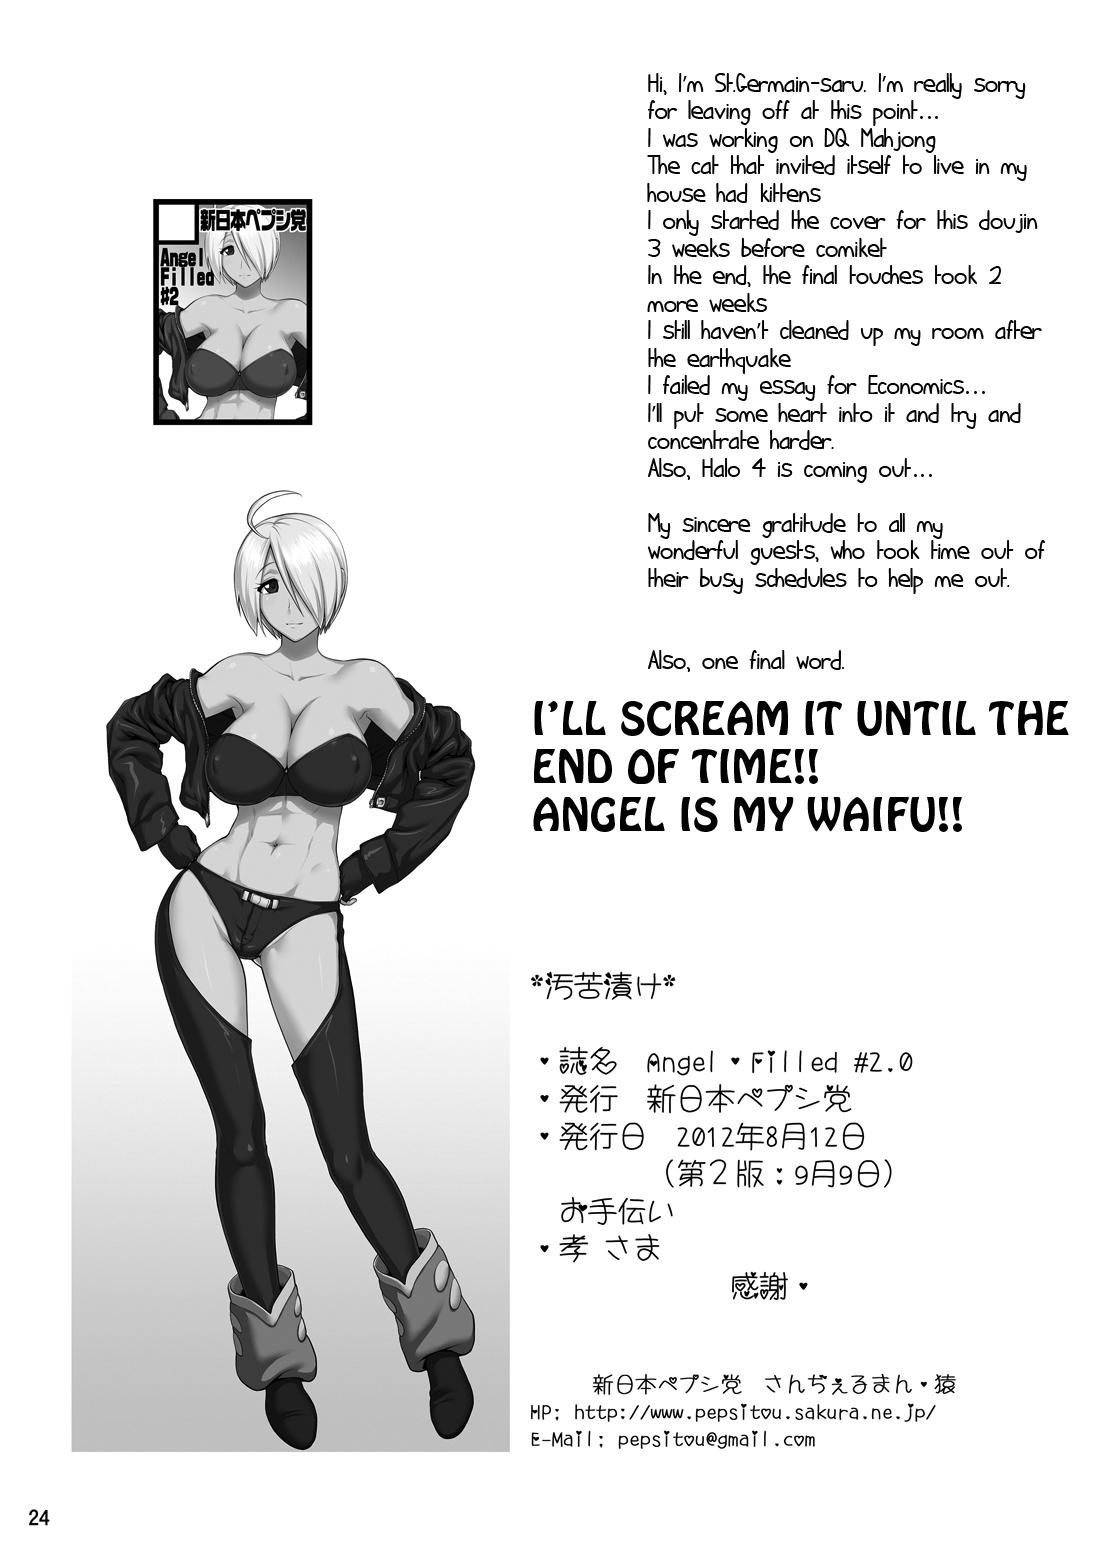 Oral Angel Filled #2.0 - King of fighters Taboo - Page 25